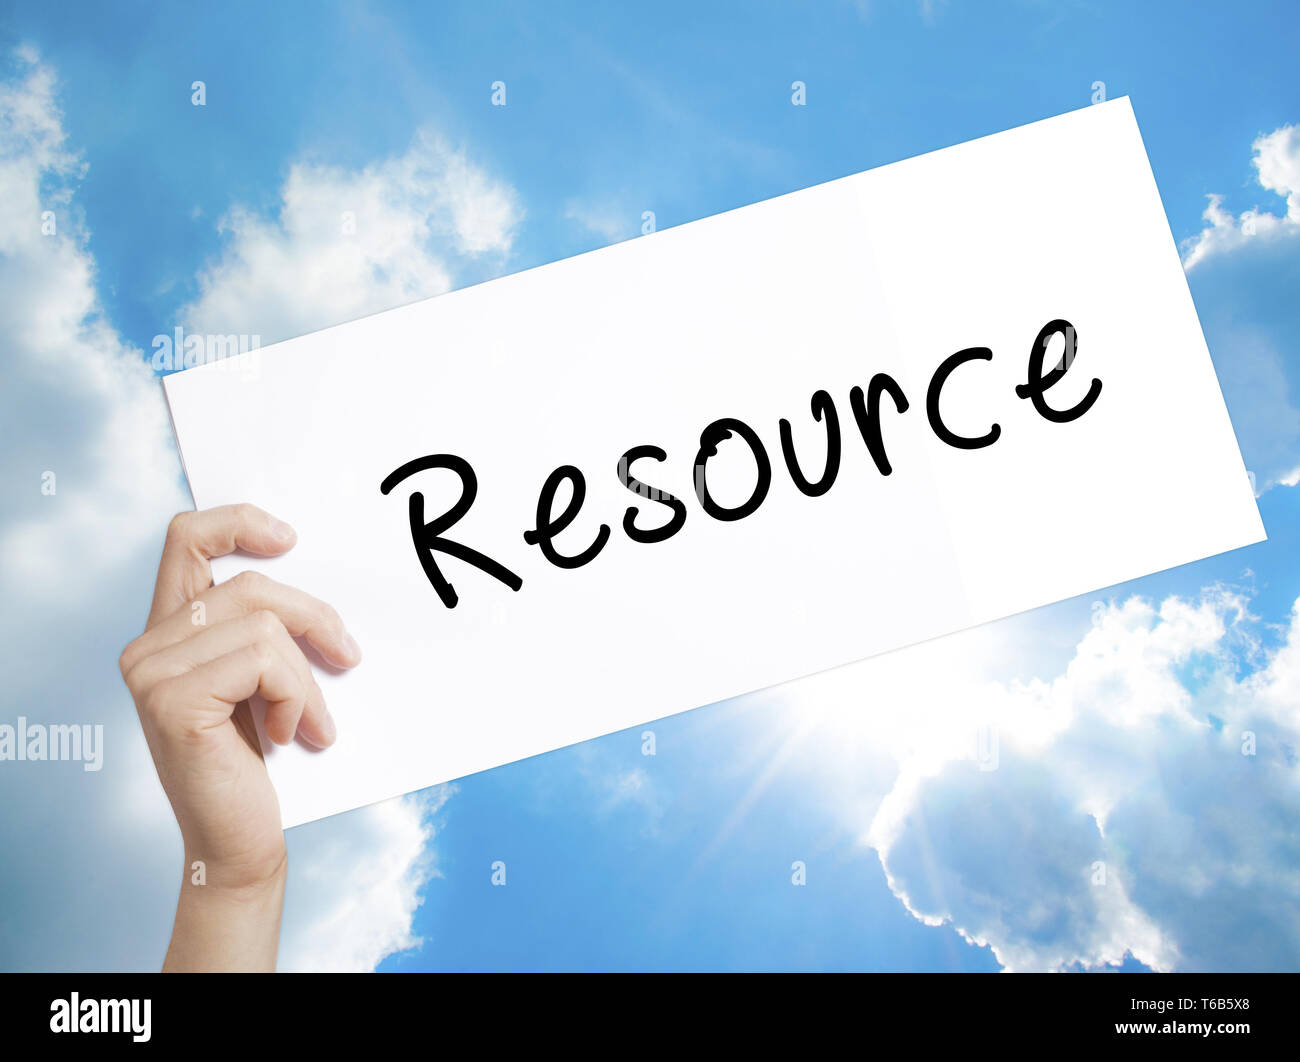 Resource Sign on white paper. Man Hand Holding Paper with text. Isolated on sky background Stock Photo